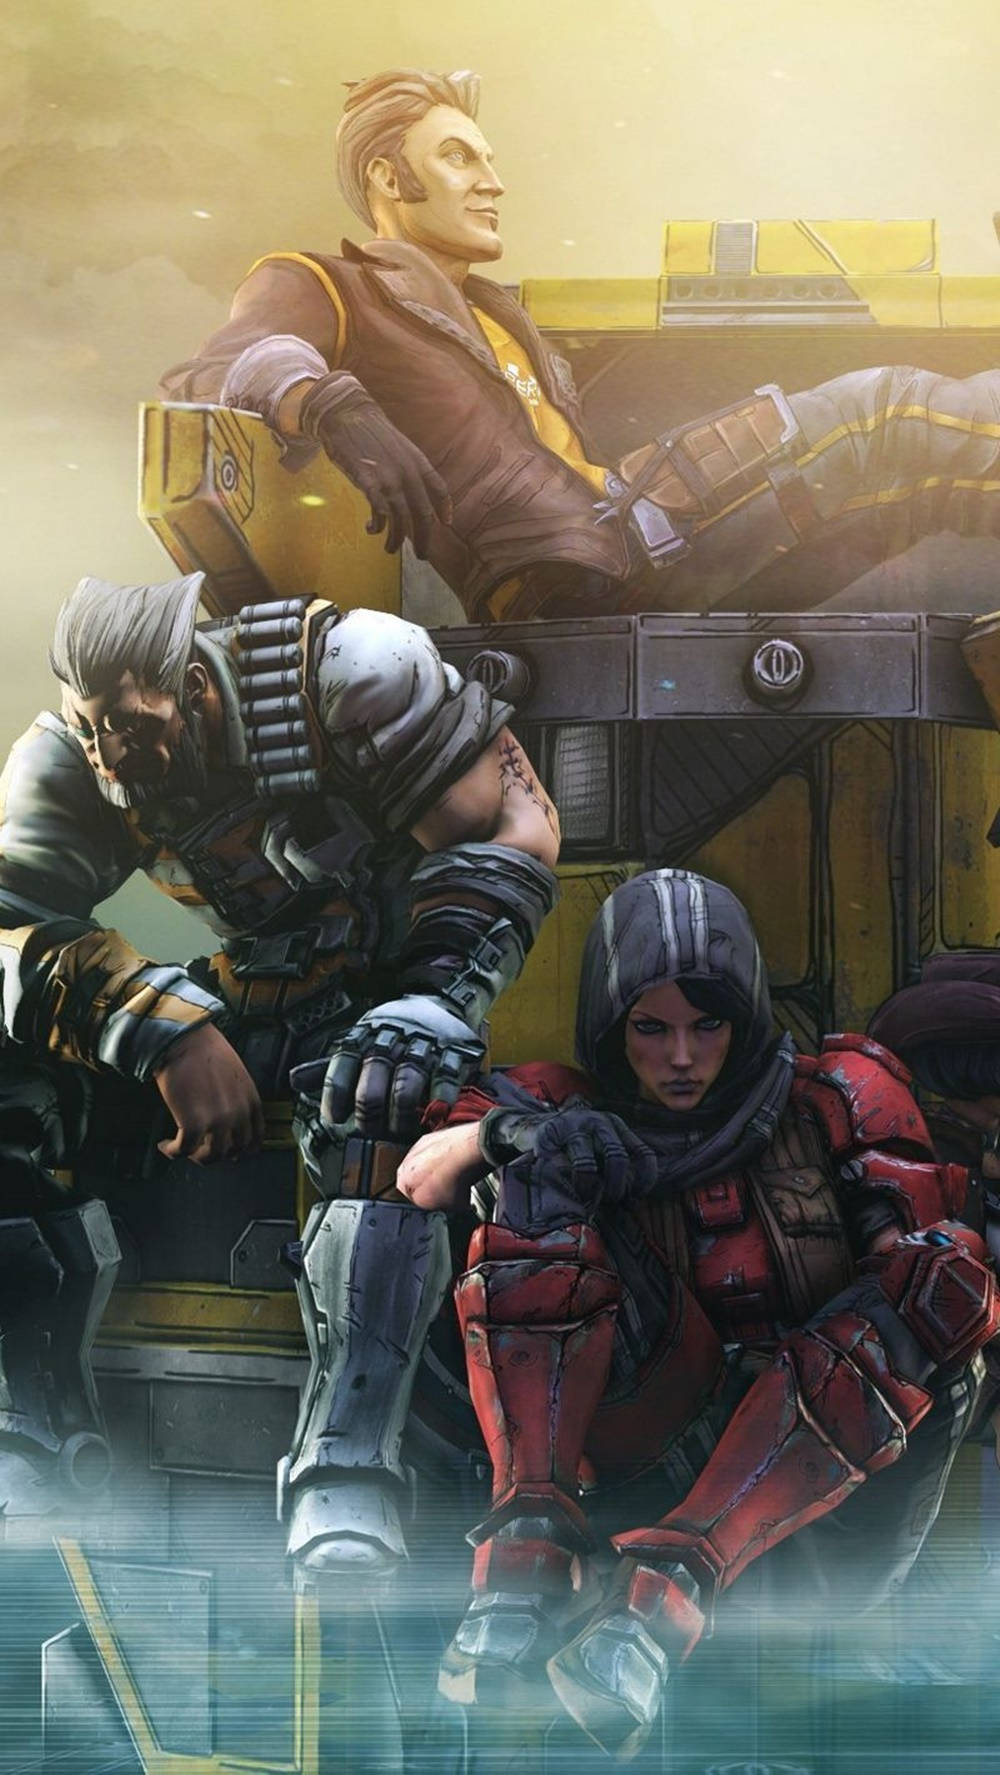 Make a statement with the Borderlands iPhone Wallpaper